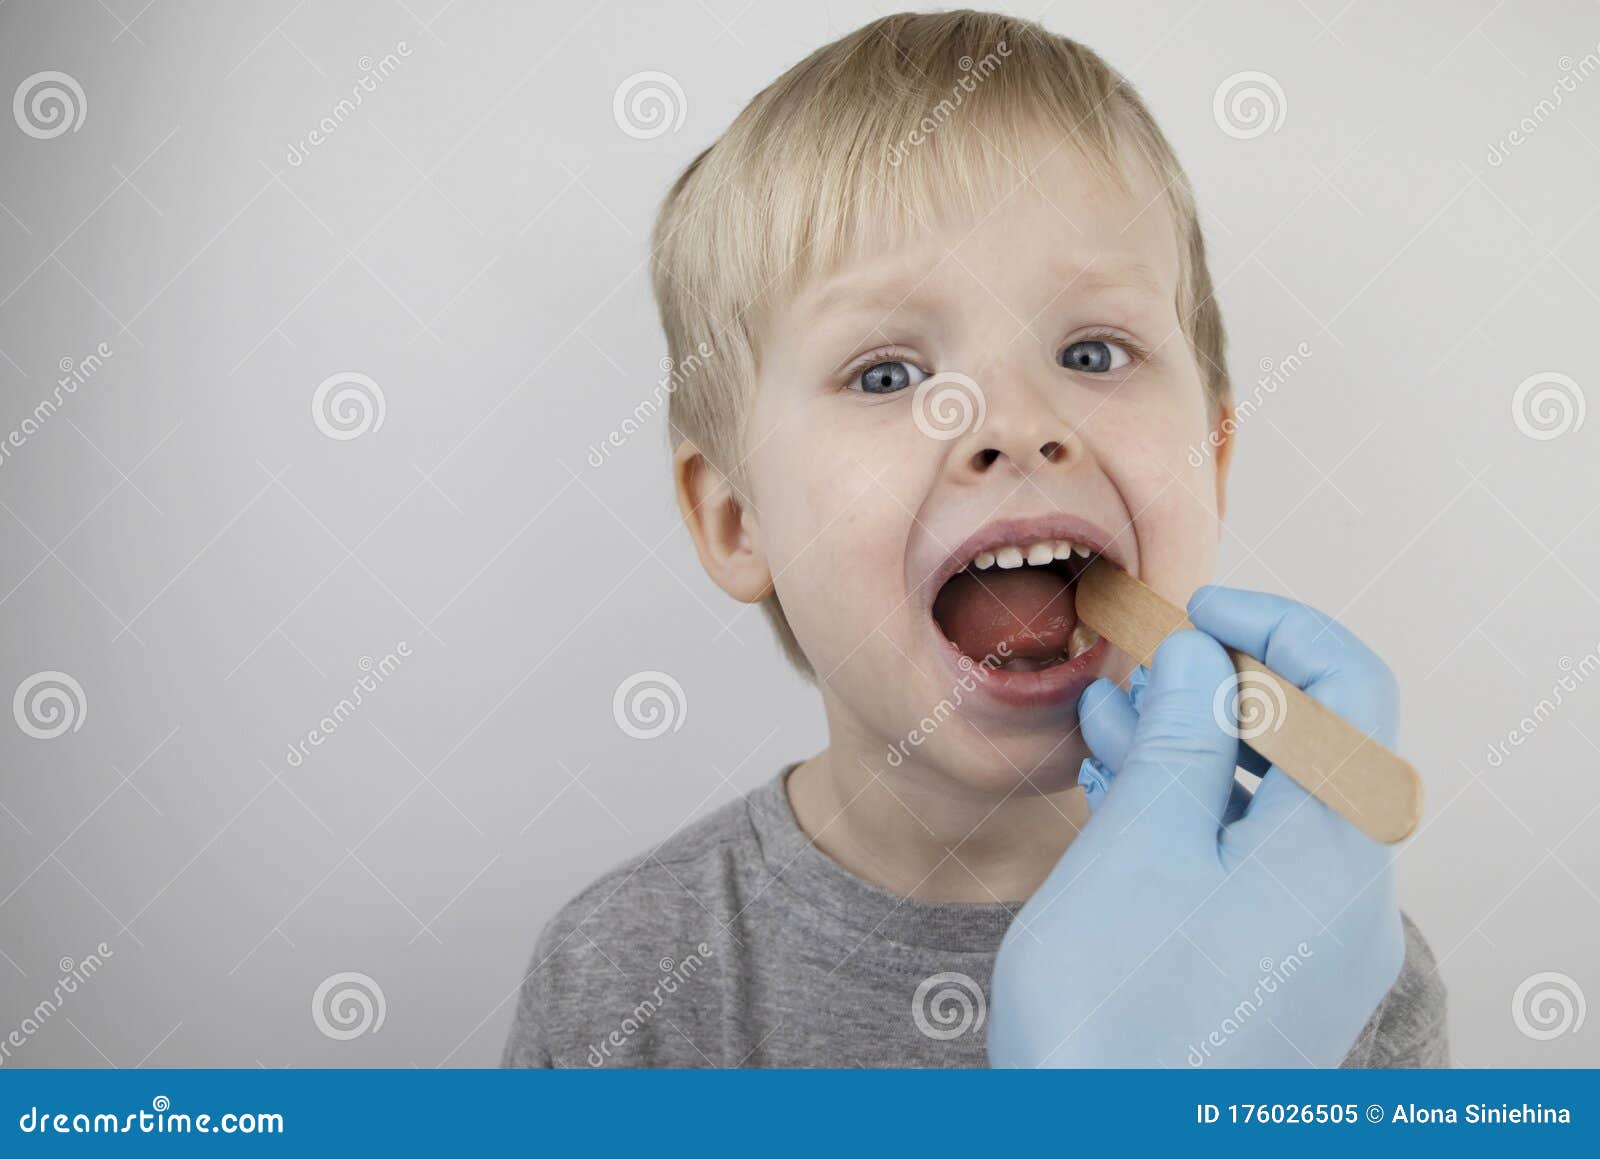 an otolaryngologist examines a child`s throat with a wooden spatula. a possible diagnosis is inflammation of the pharynx, tonsils